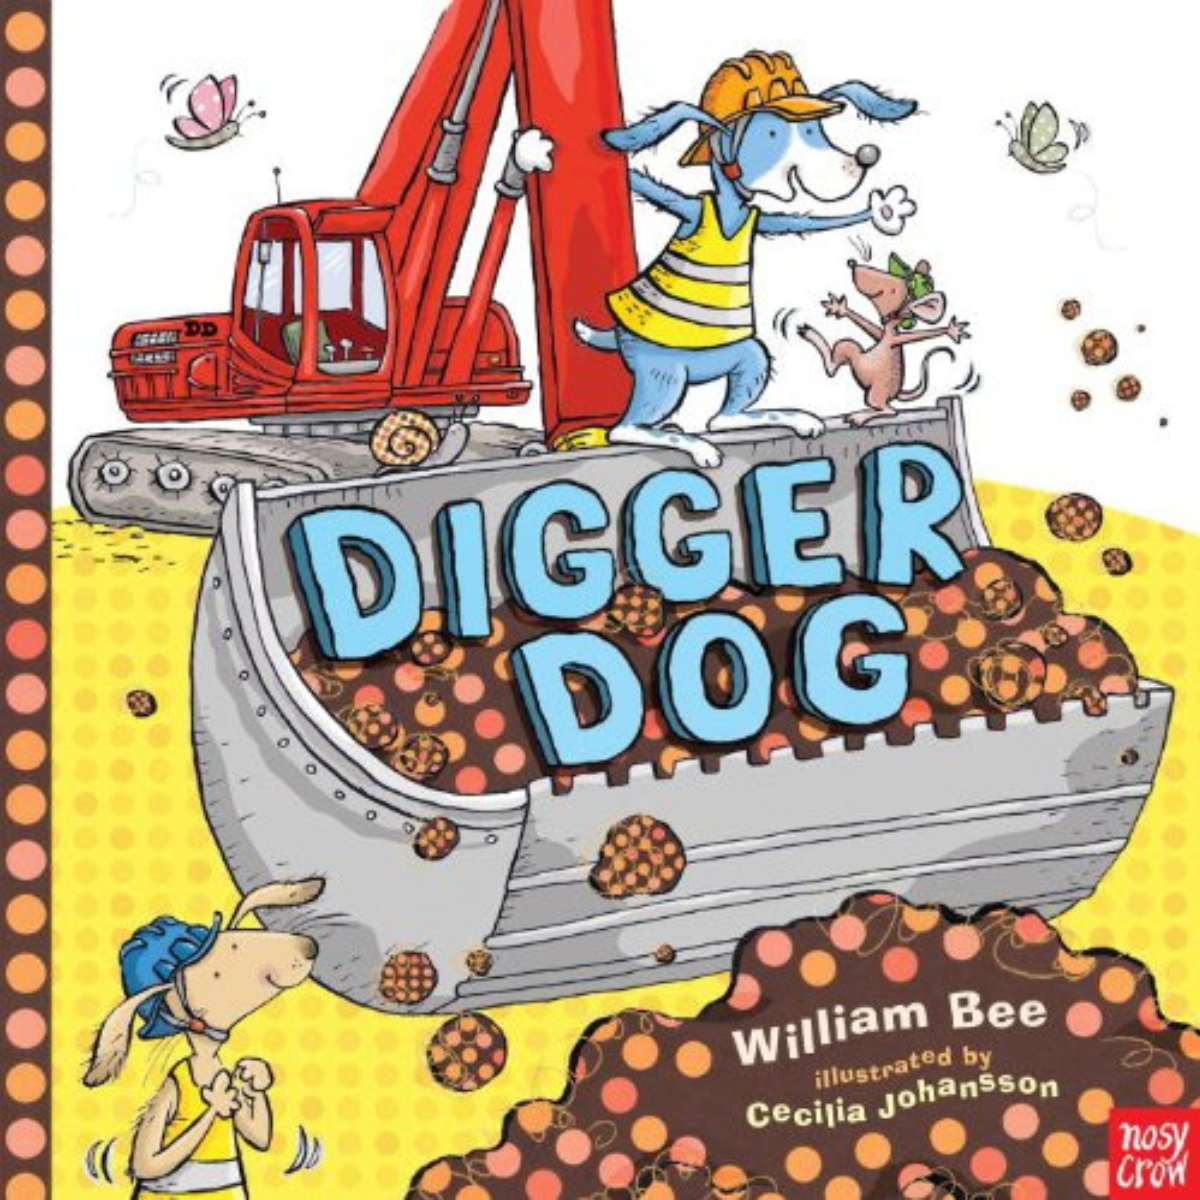 Digger Dog by William Bee